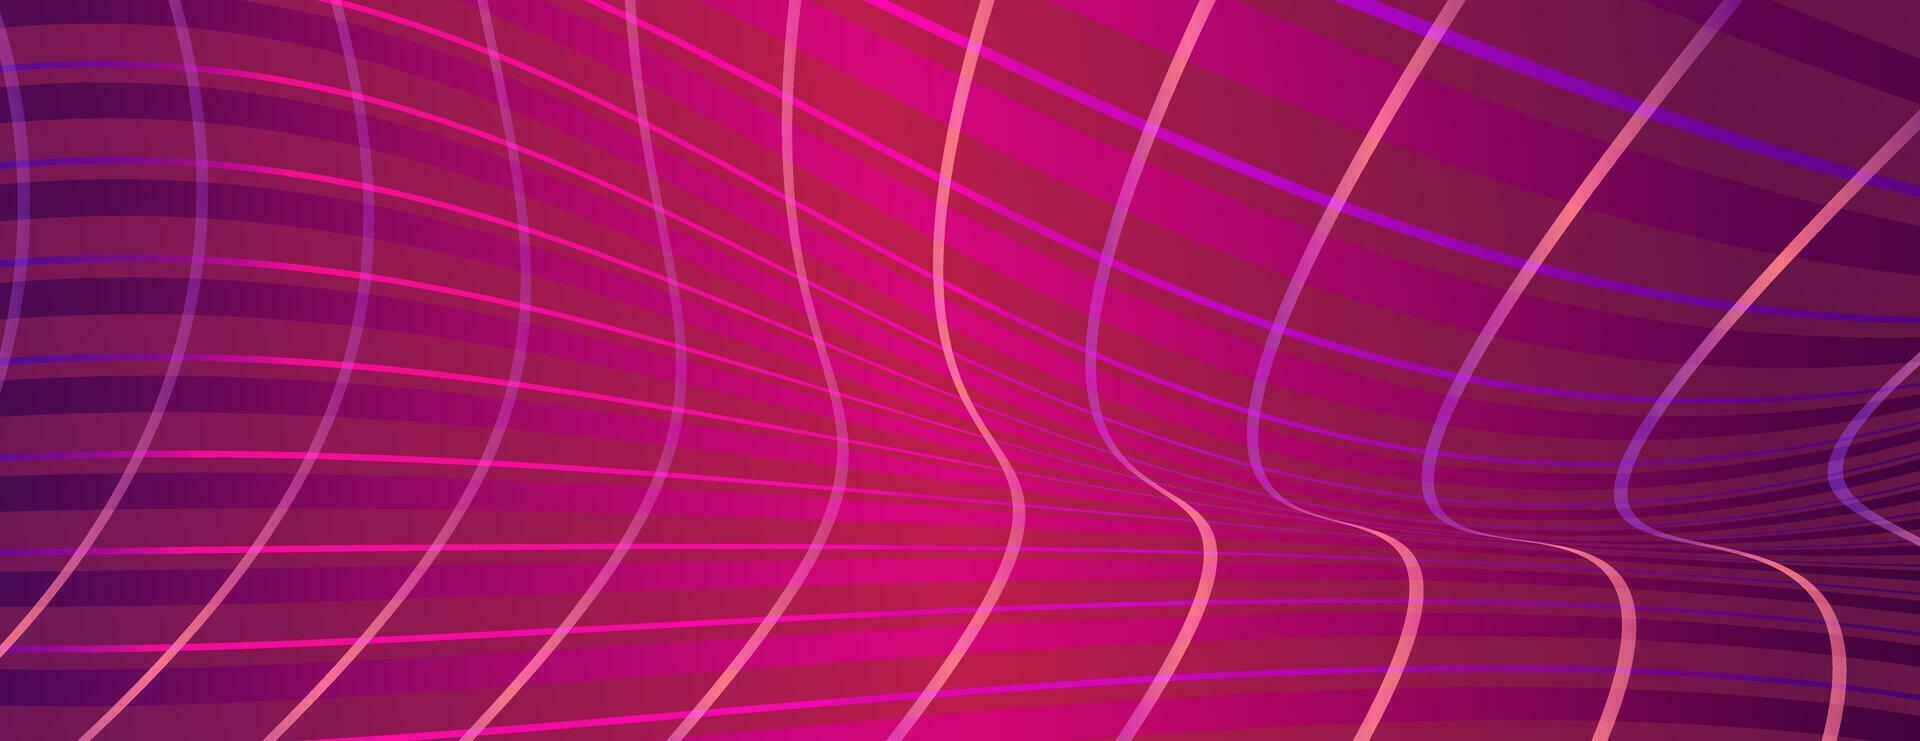 Abstract smooth plaid wavy background. Colorful purple-pink violet gradient wallpaper. Modern shiny gradient wave lines on magenta background. Suit for poster, cover, banner, brochure, website, sale vector